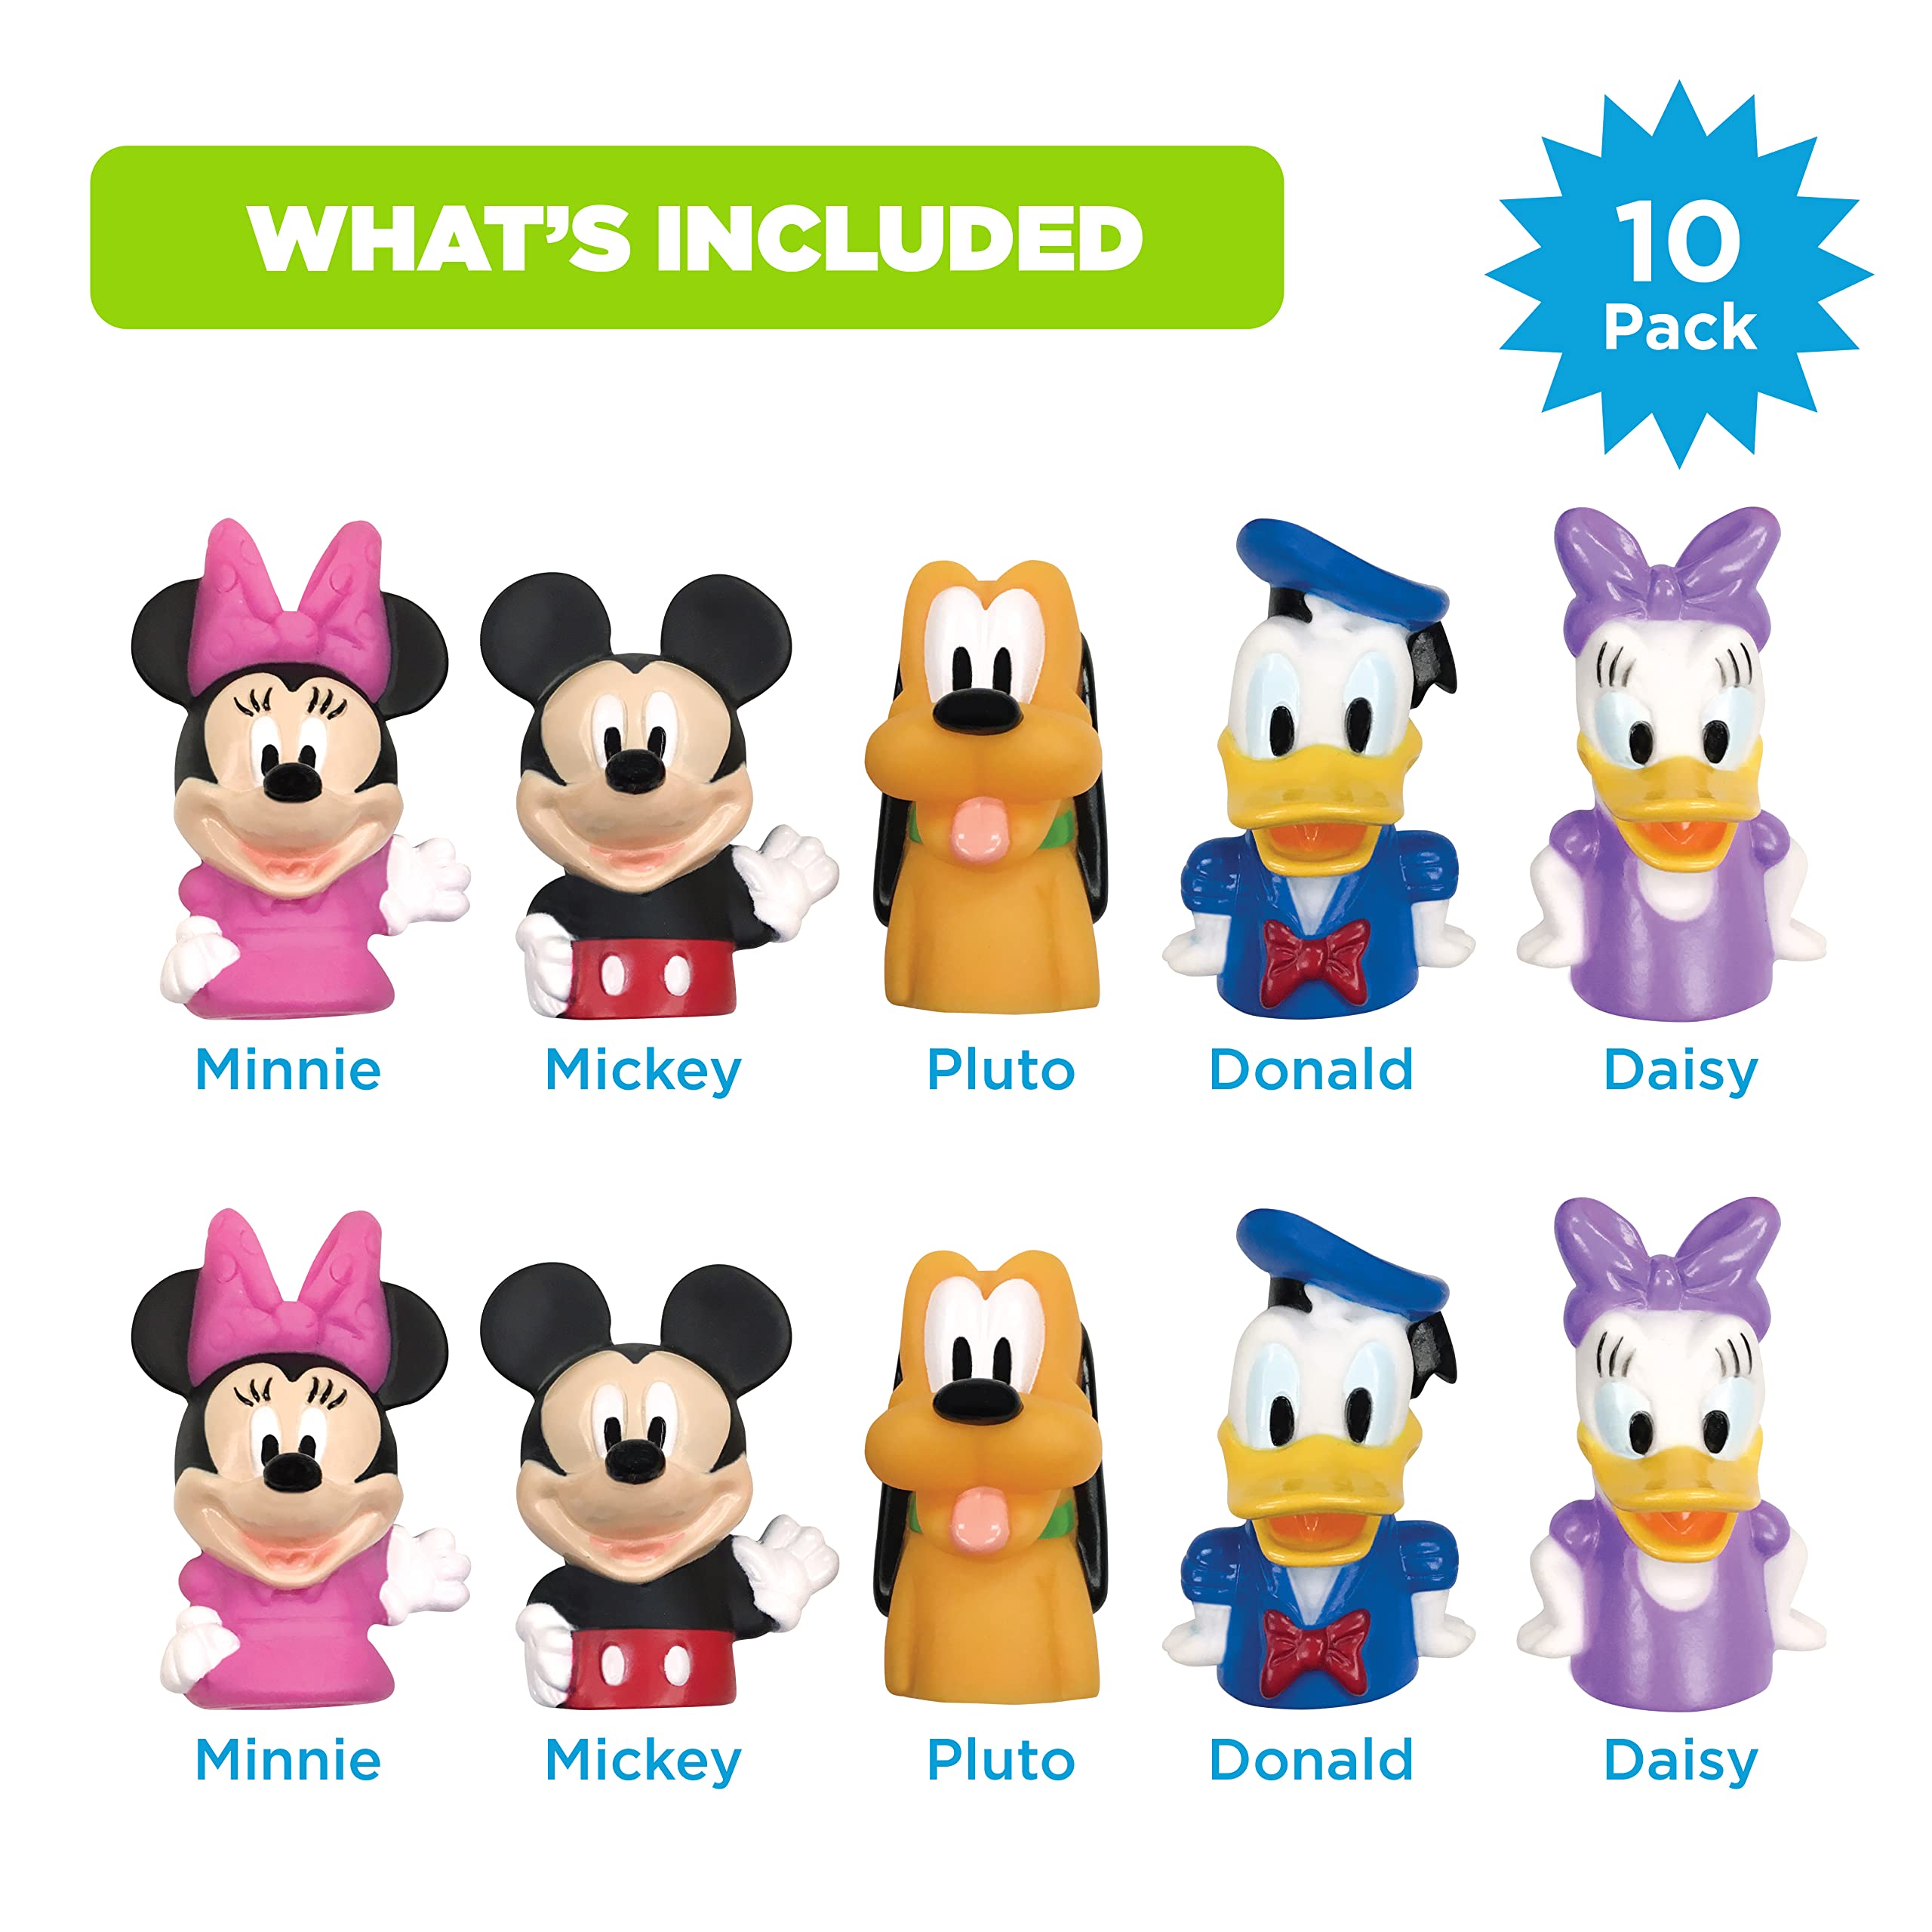 Disney Mickey Mouse & Friends 10 Piece Finger Puppet Set –Party Favors, Educational, Bath Toys, Floating Pool Toys, Beach Toys, Finger Toys, Playtime